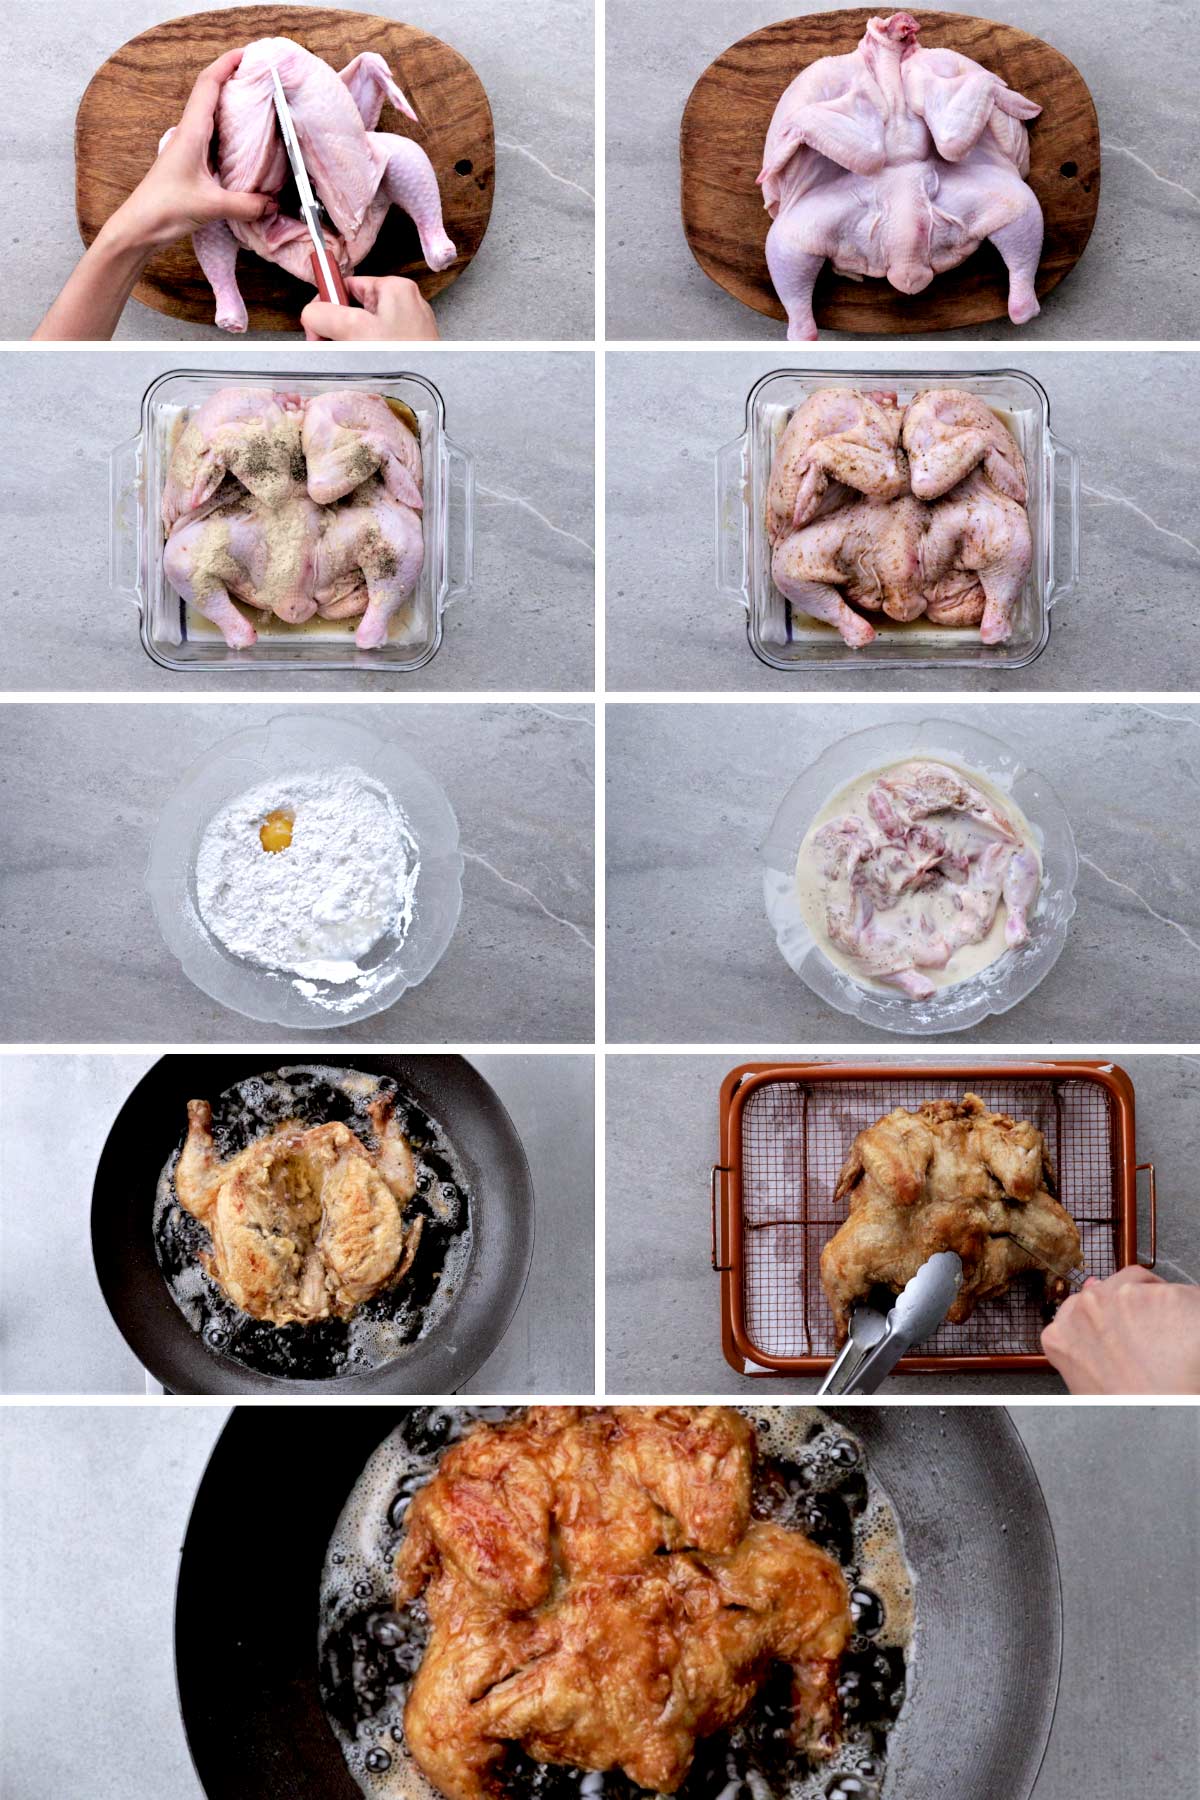 Steps on how to cook a super crispy whole fried chicken.